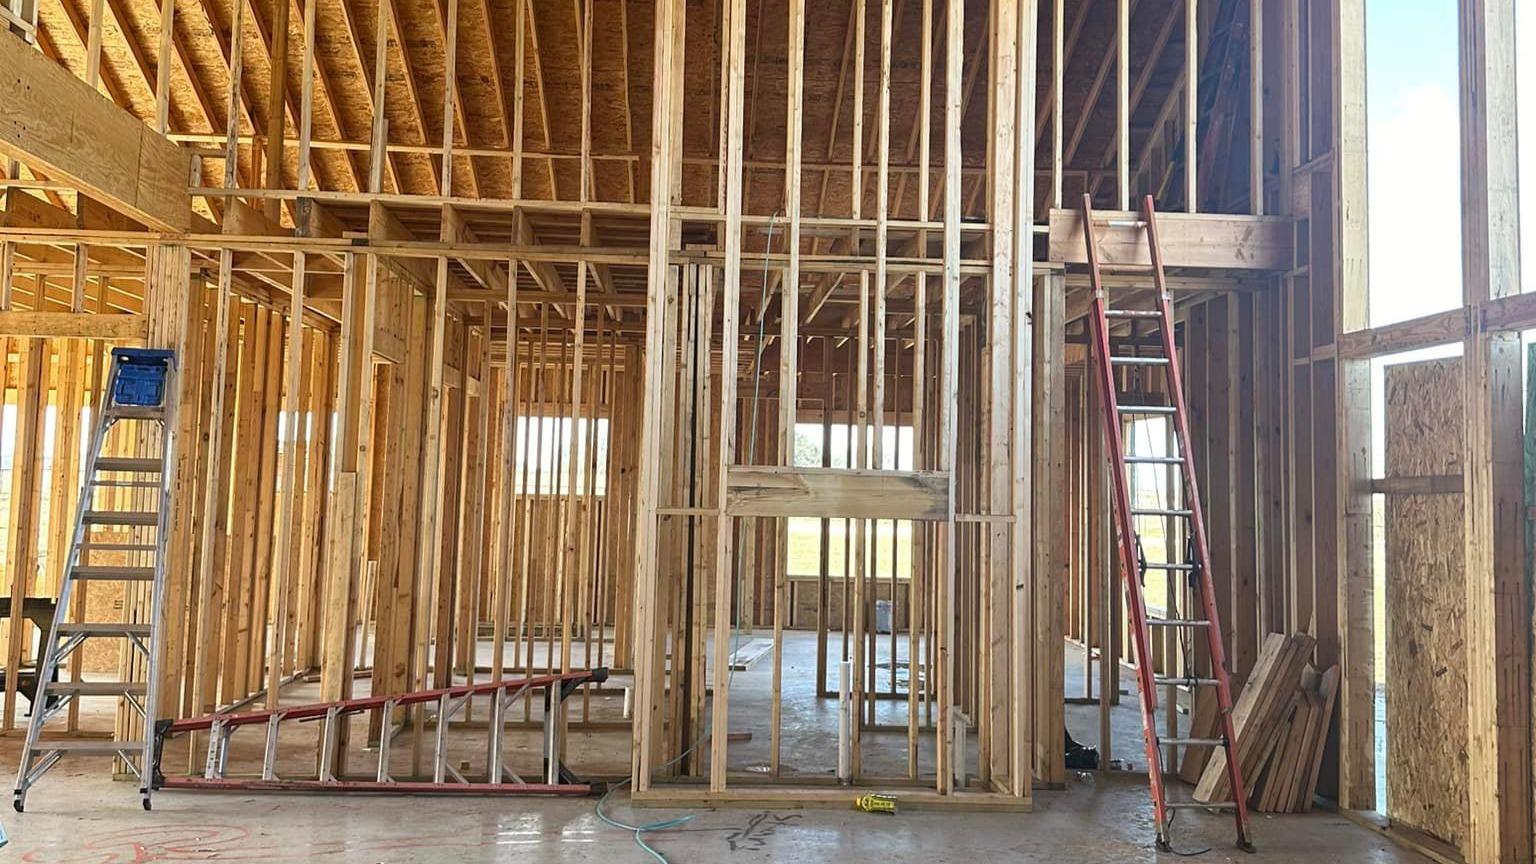 Ensure the structural integrity of your building with building framing services from New Perspective Construction. Our experienced team specializes in framing construction, providing sturdy and reliable frameworks for residential and commercial properties. With our attention to detail and adherence to building codes, you can trust us to lay the foundation for a safe and secure structure.